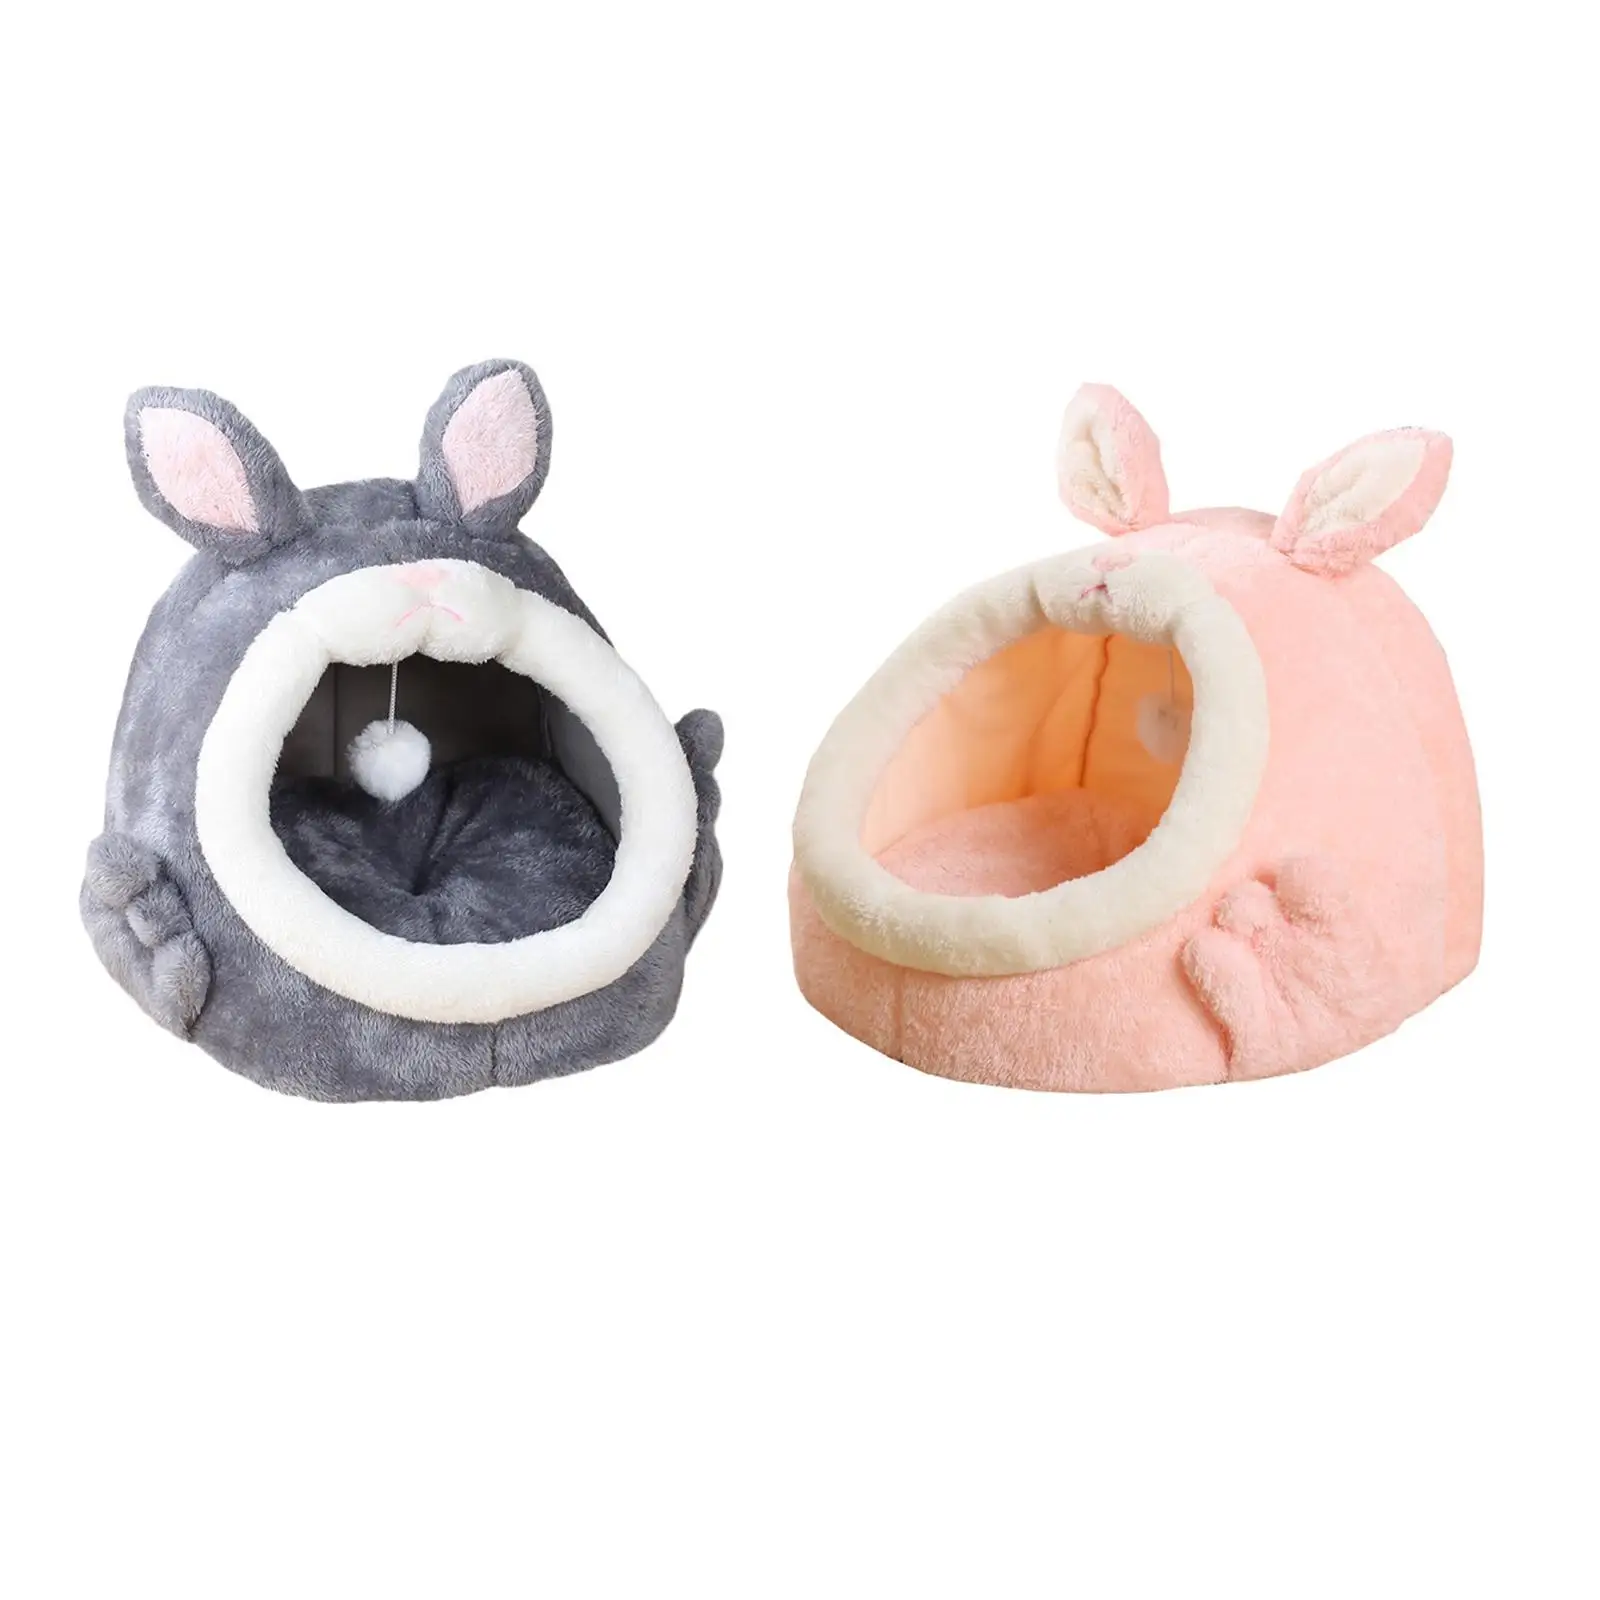 Cats Cave Bed Cat Privacy Space Comfortable Super Soft Cushion Pet Bed Washable for Small Dog Small Animal Rabbits Pet Pig